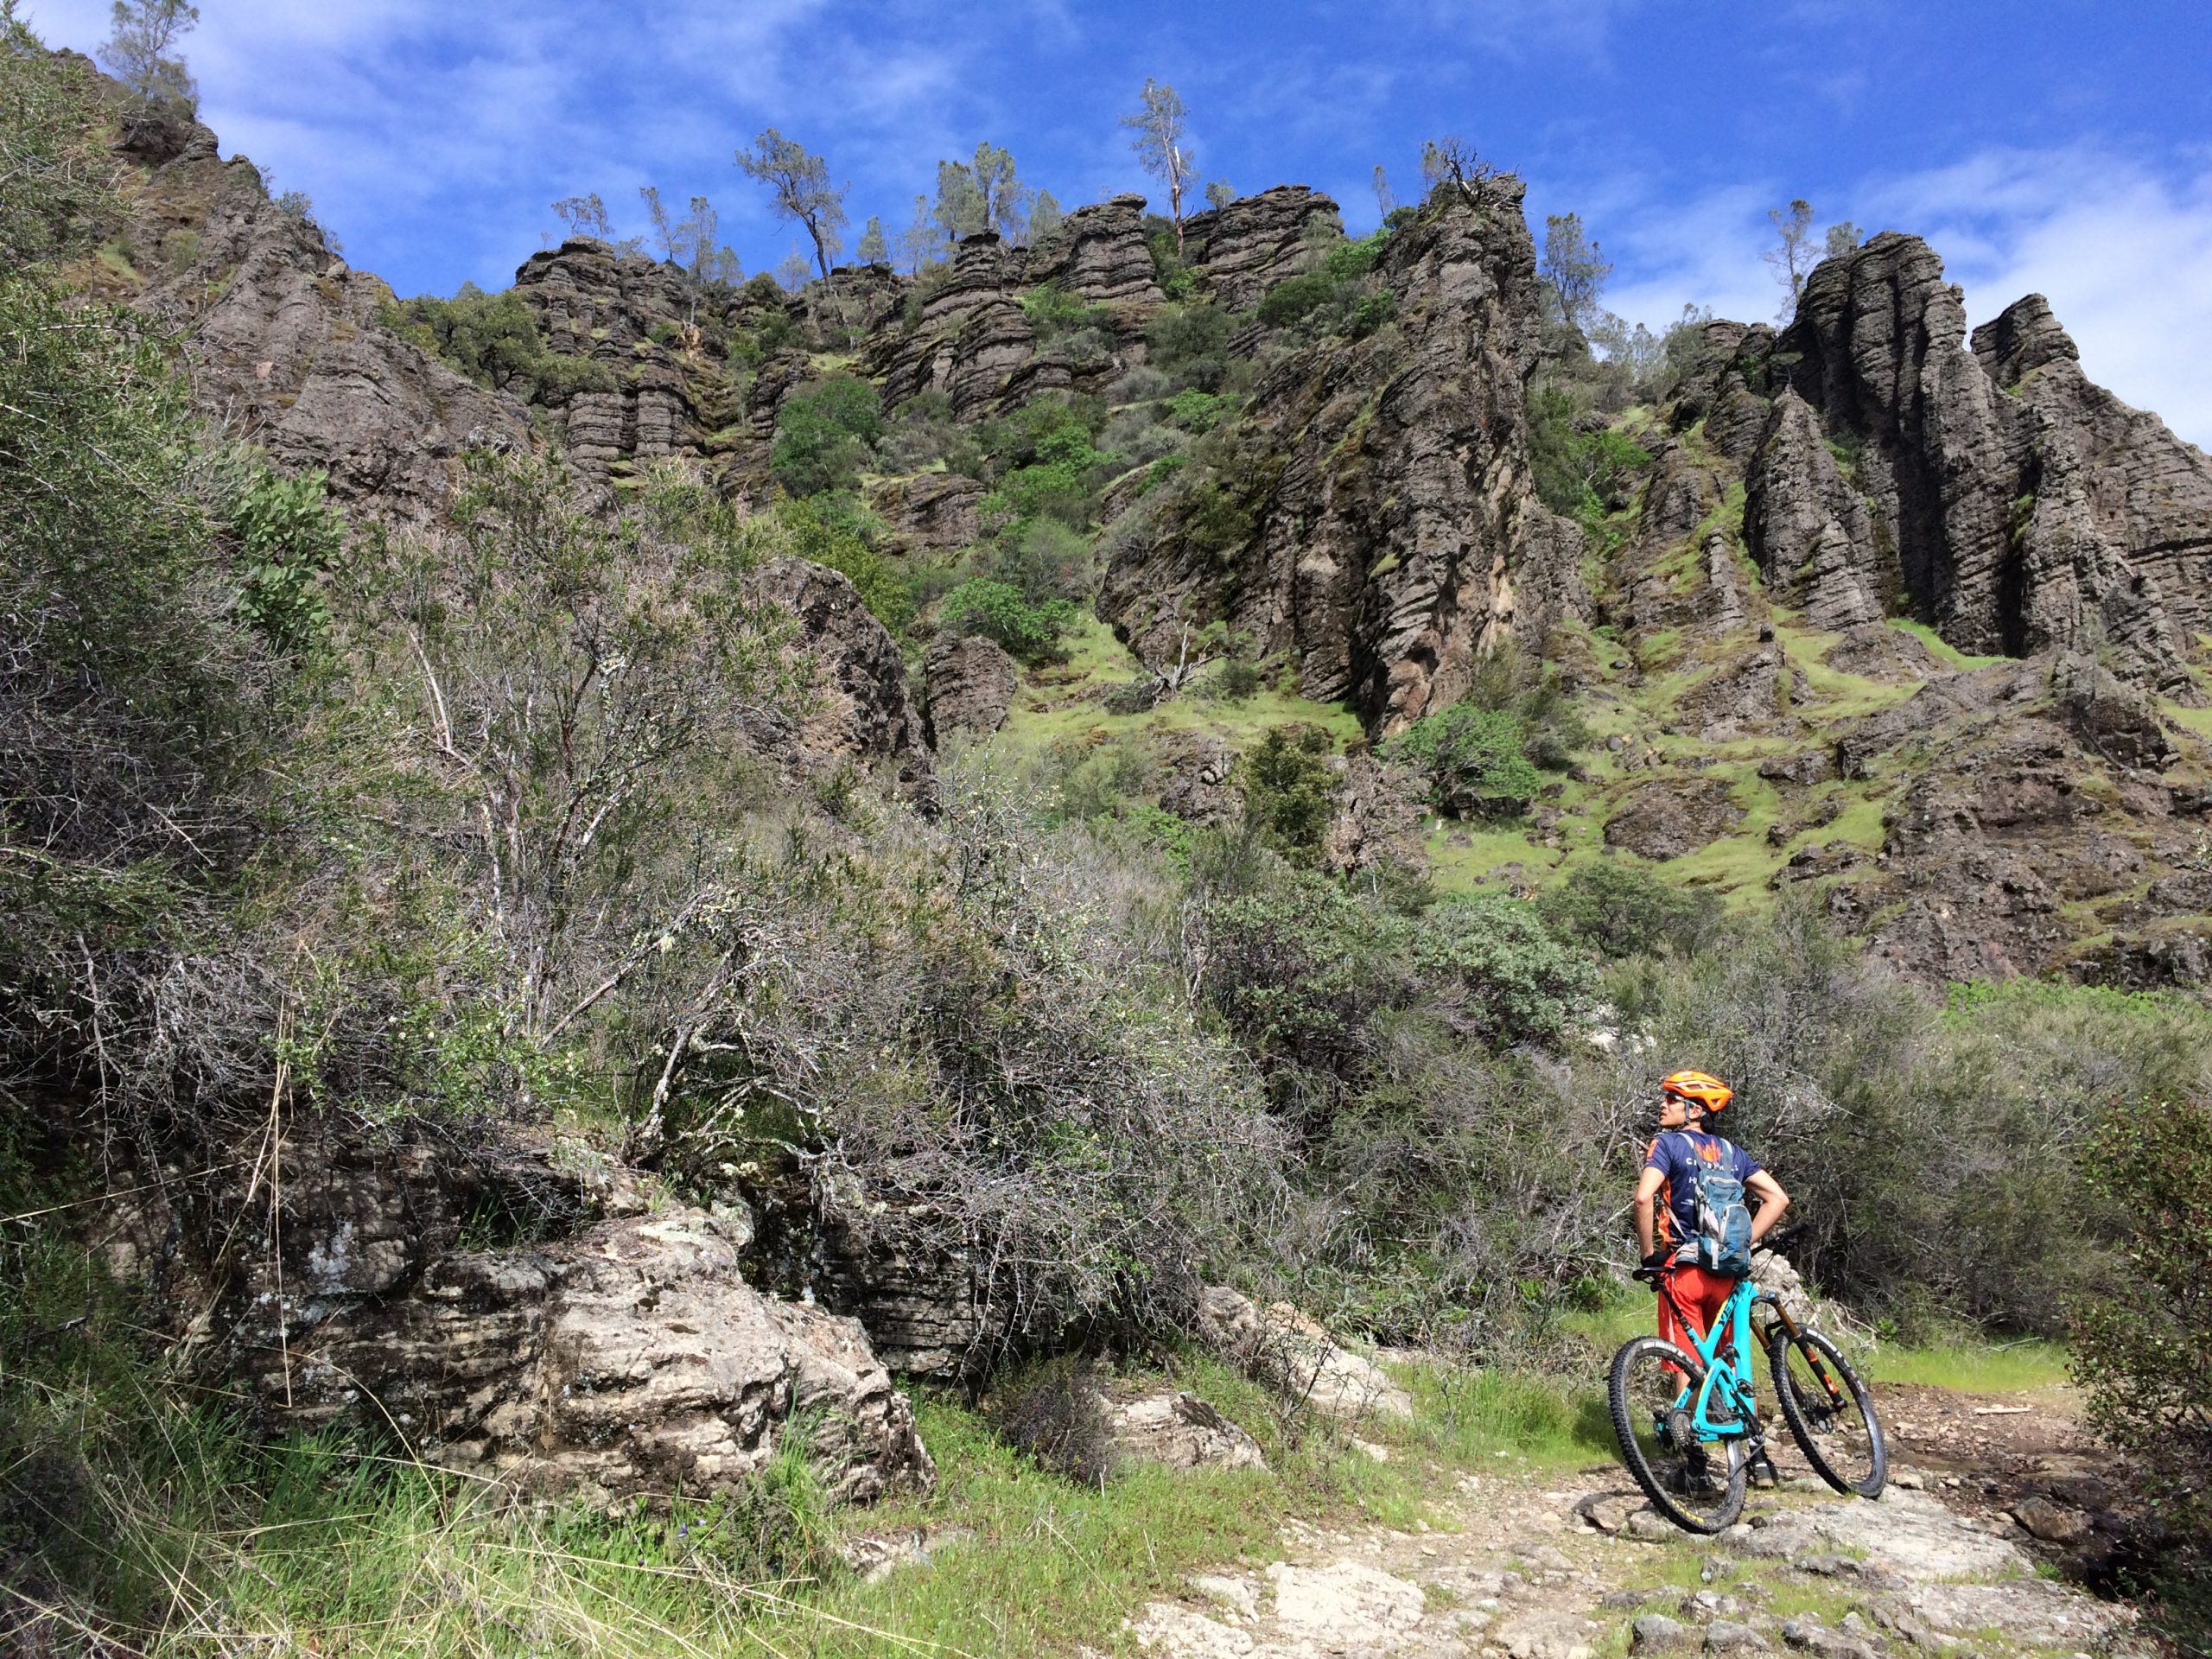 A mountain biker looks up at a rock formation